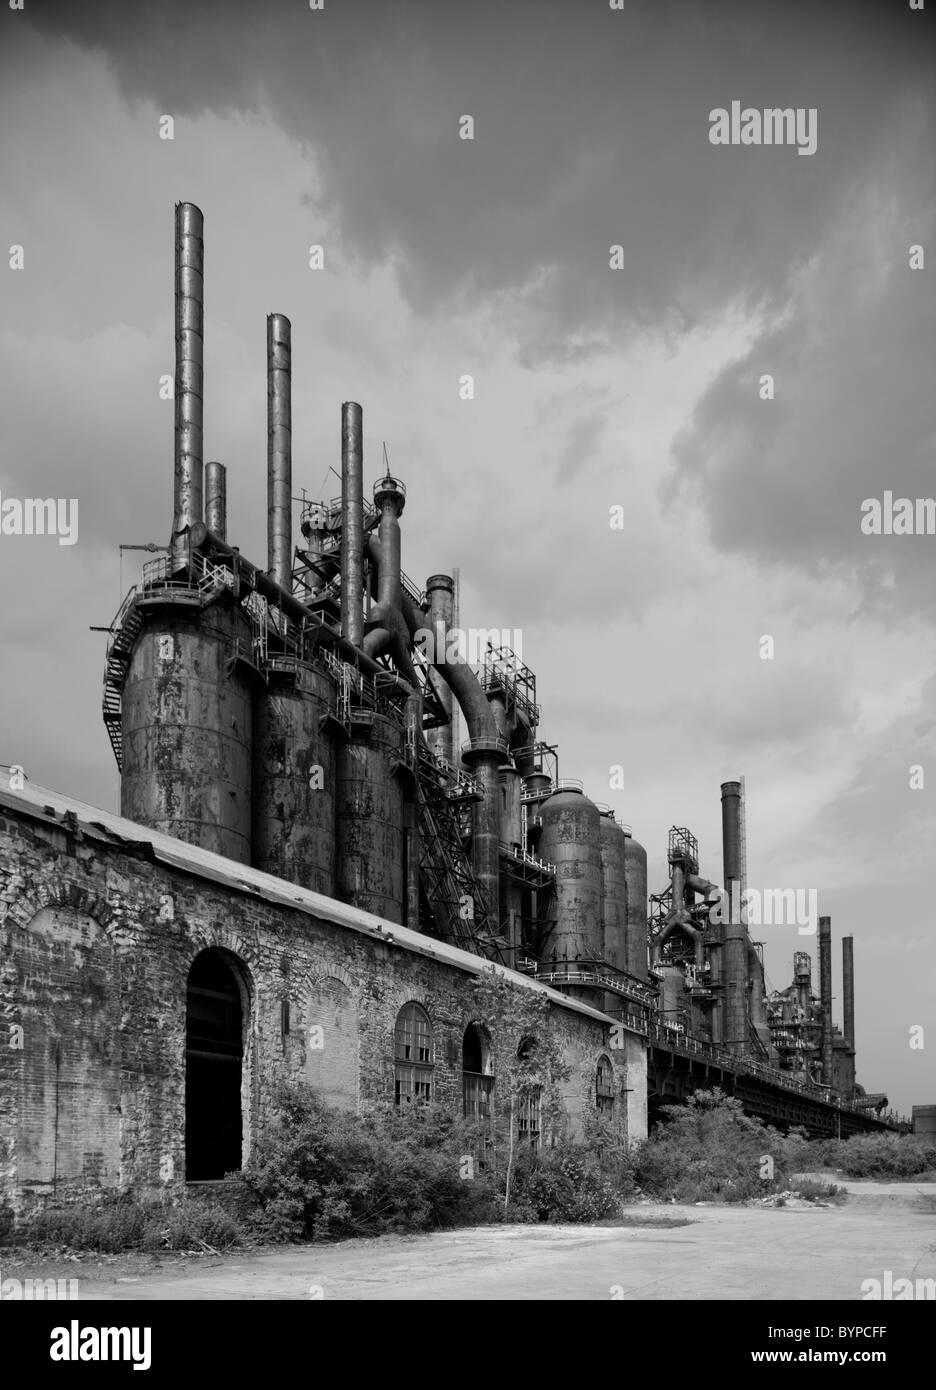 USA, Pennsylvania, Bethlehem, Abandoned and rusting remains of blast furnaces at Bethlehem Steel Plant that was closed in 1995 Stock Photo